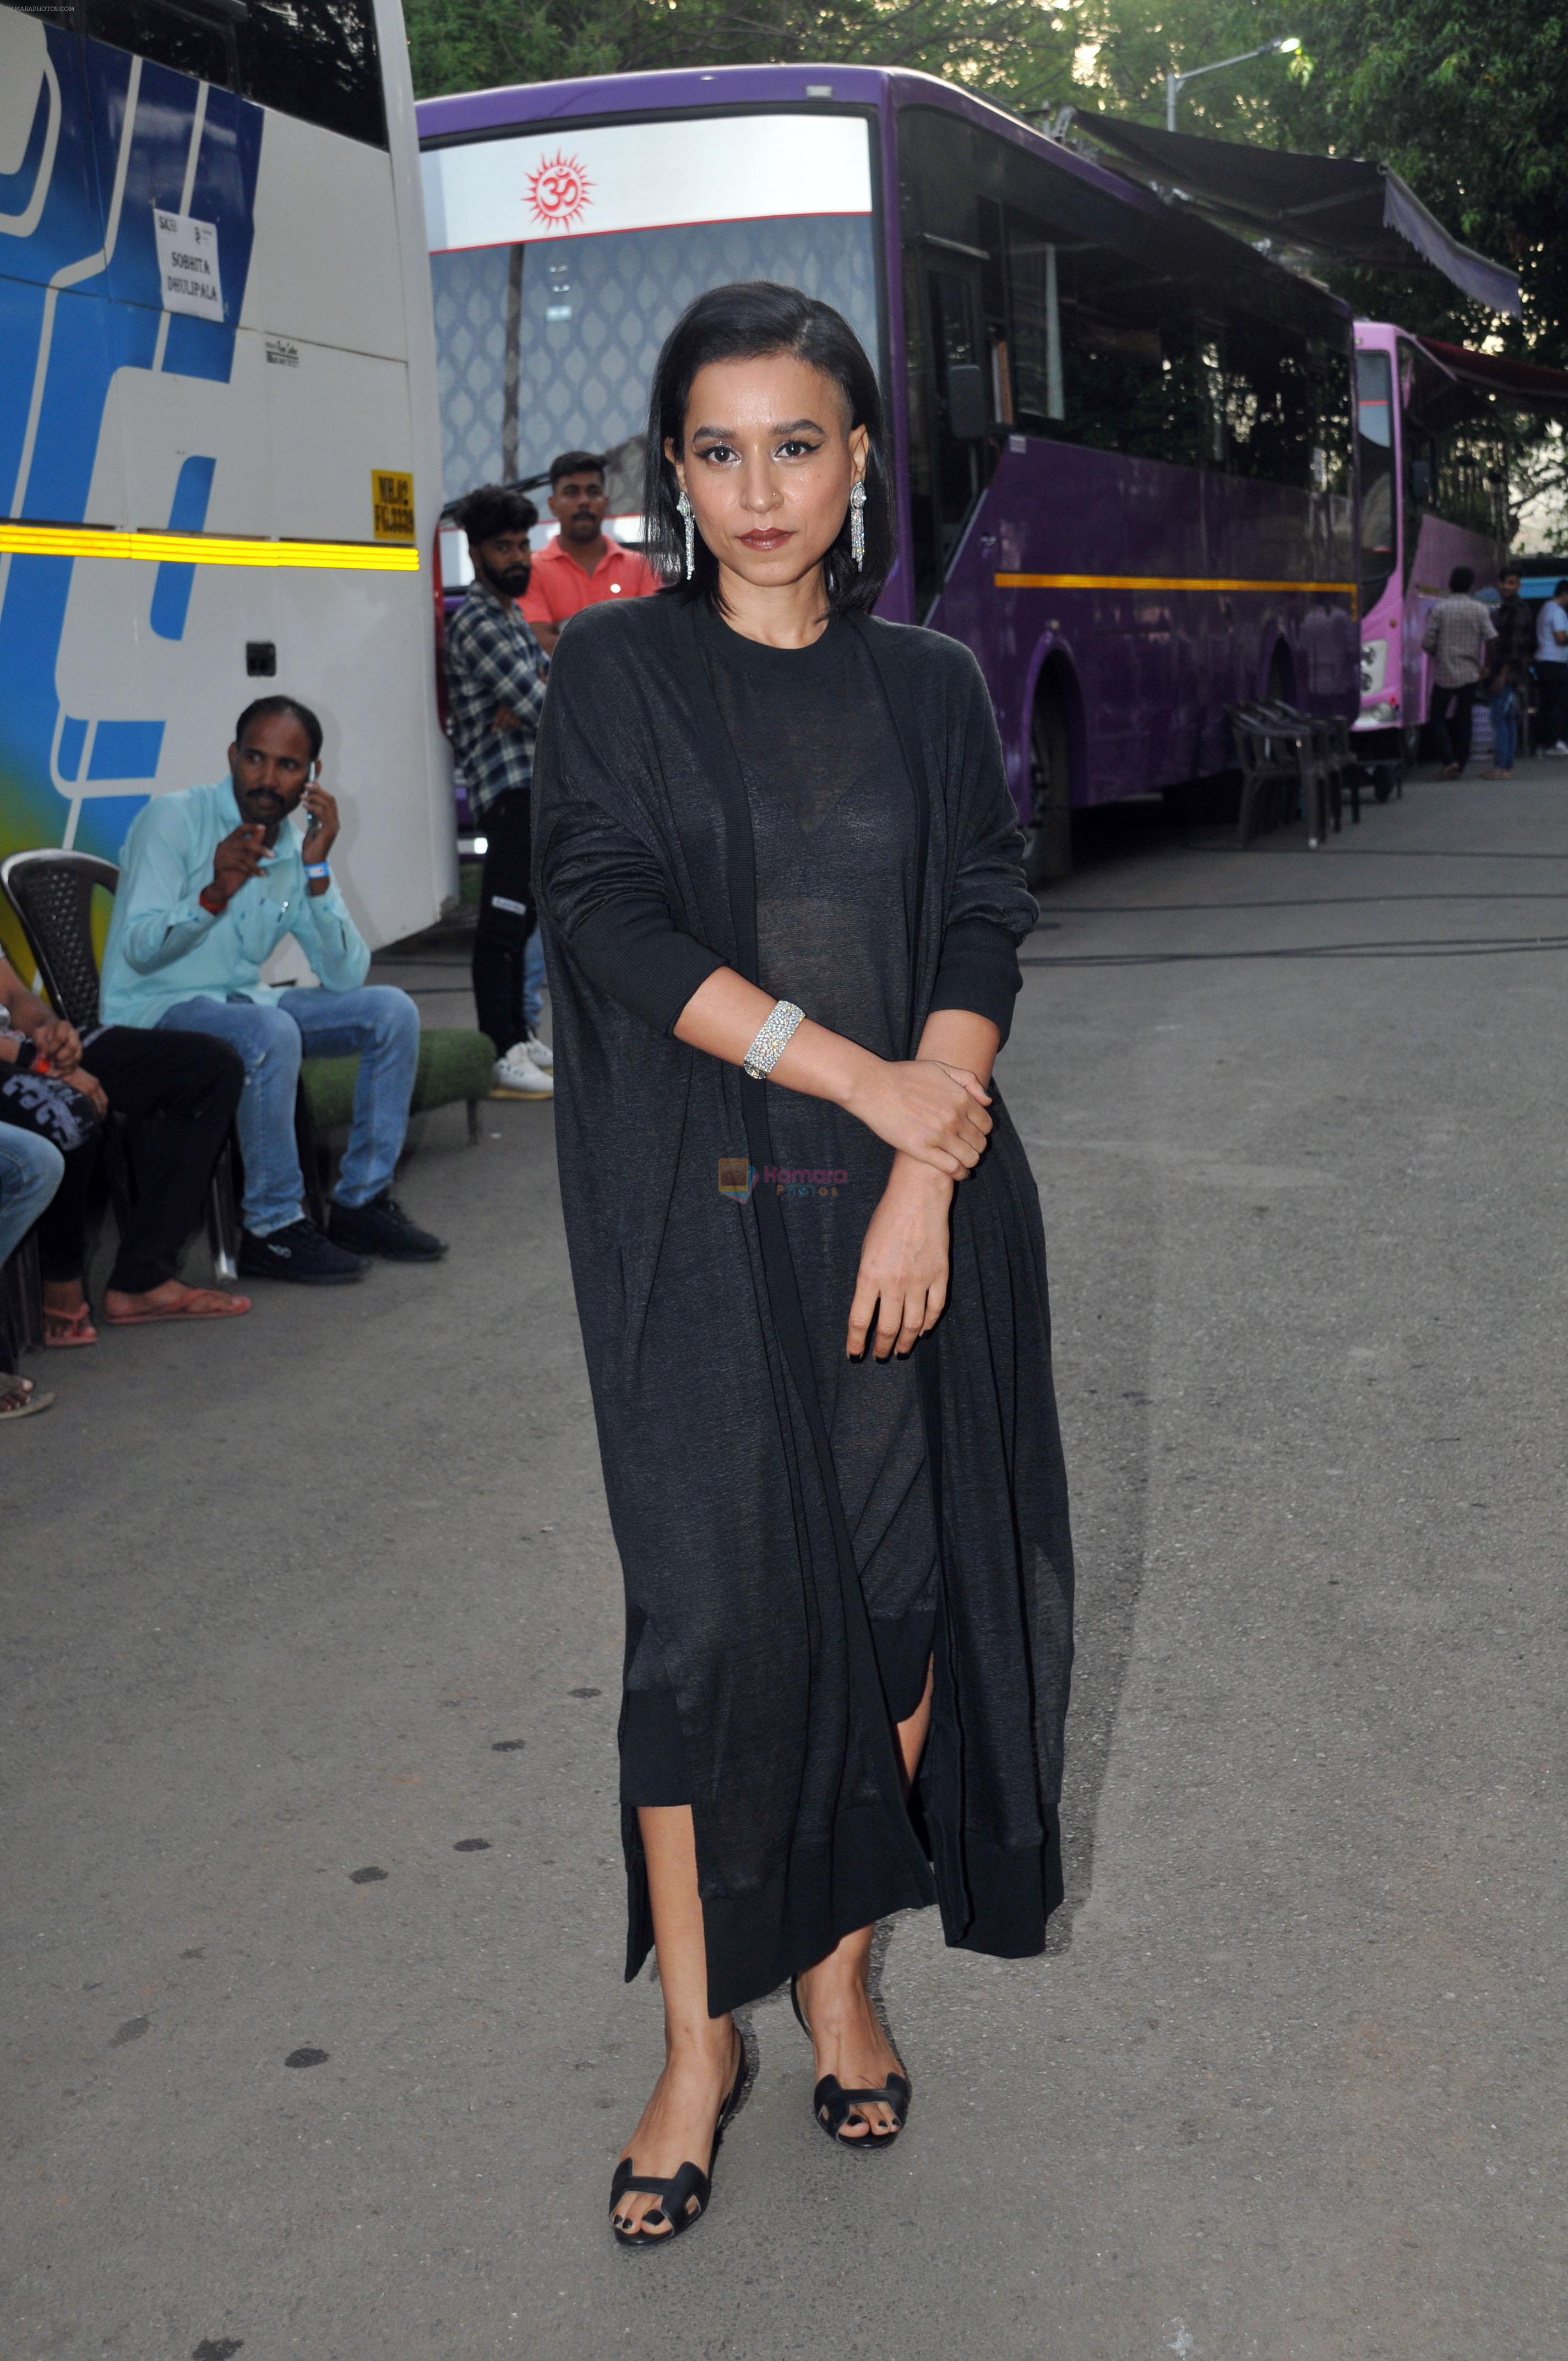 Tillotama Shome on the sets of The Kapil Sharma Show at Filmcity Goregaon promoting the 2nd season of The Night Manager on 22 Jun 2023